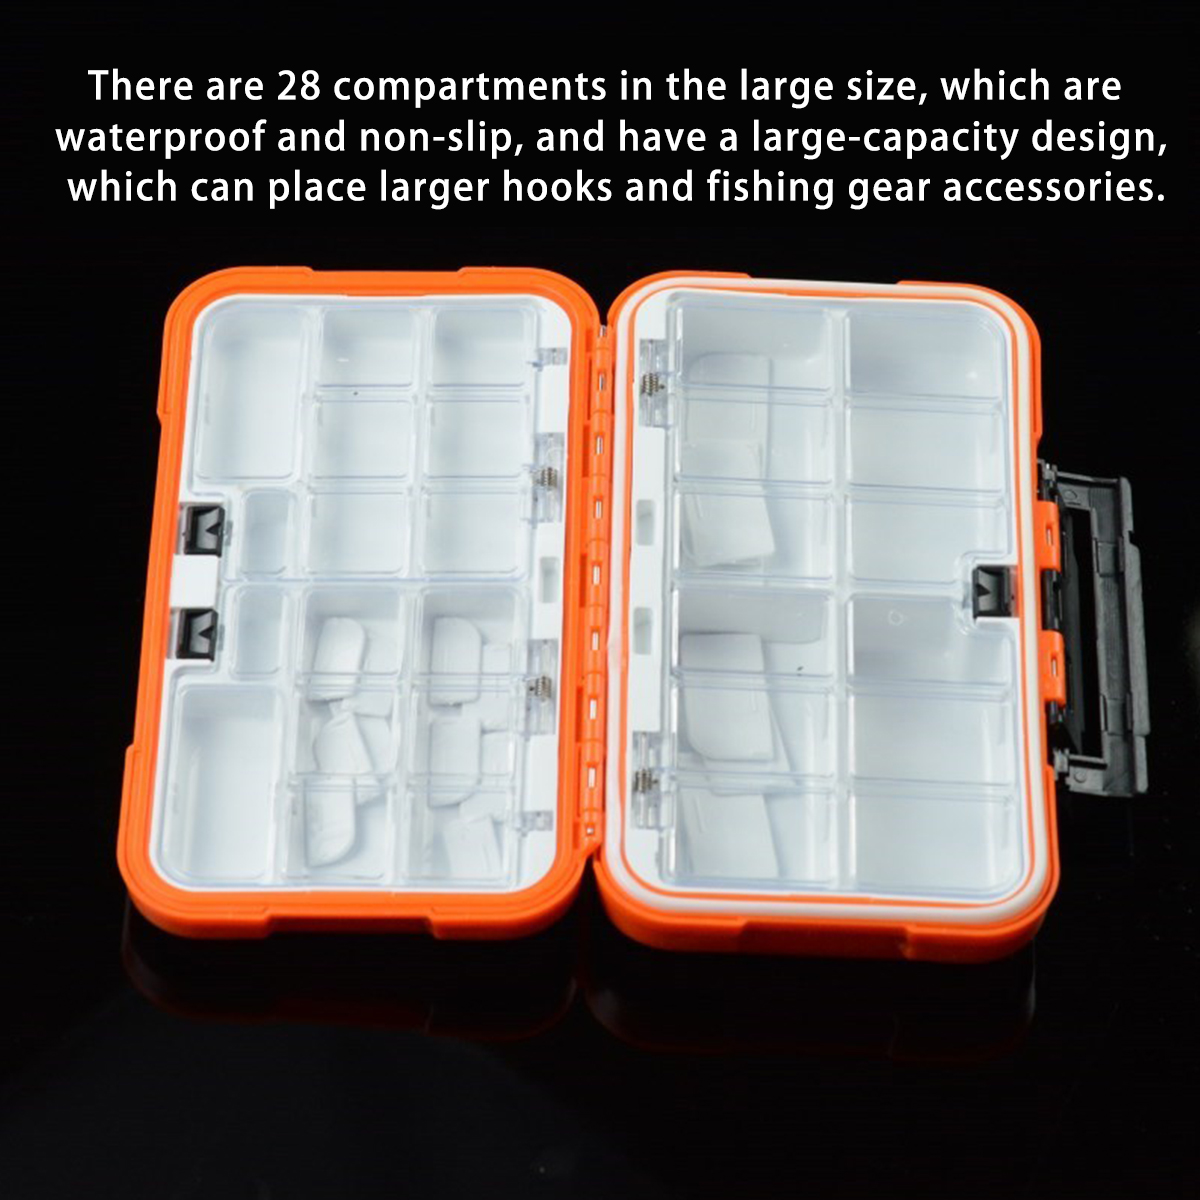 Sealed-Waterproof-Fishing-Tackle-Tray-ABS-Plastic-Fishing-Accessories-Box-Swivel-Snap-Lure--Parts-St-1634862-6